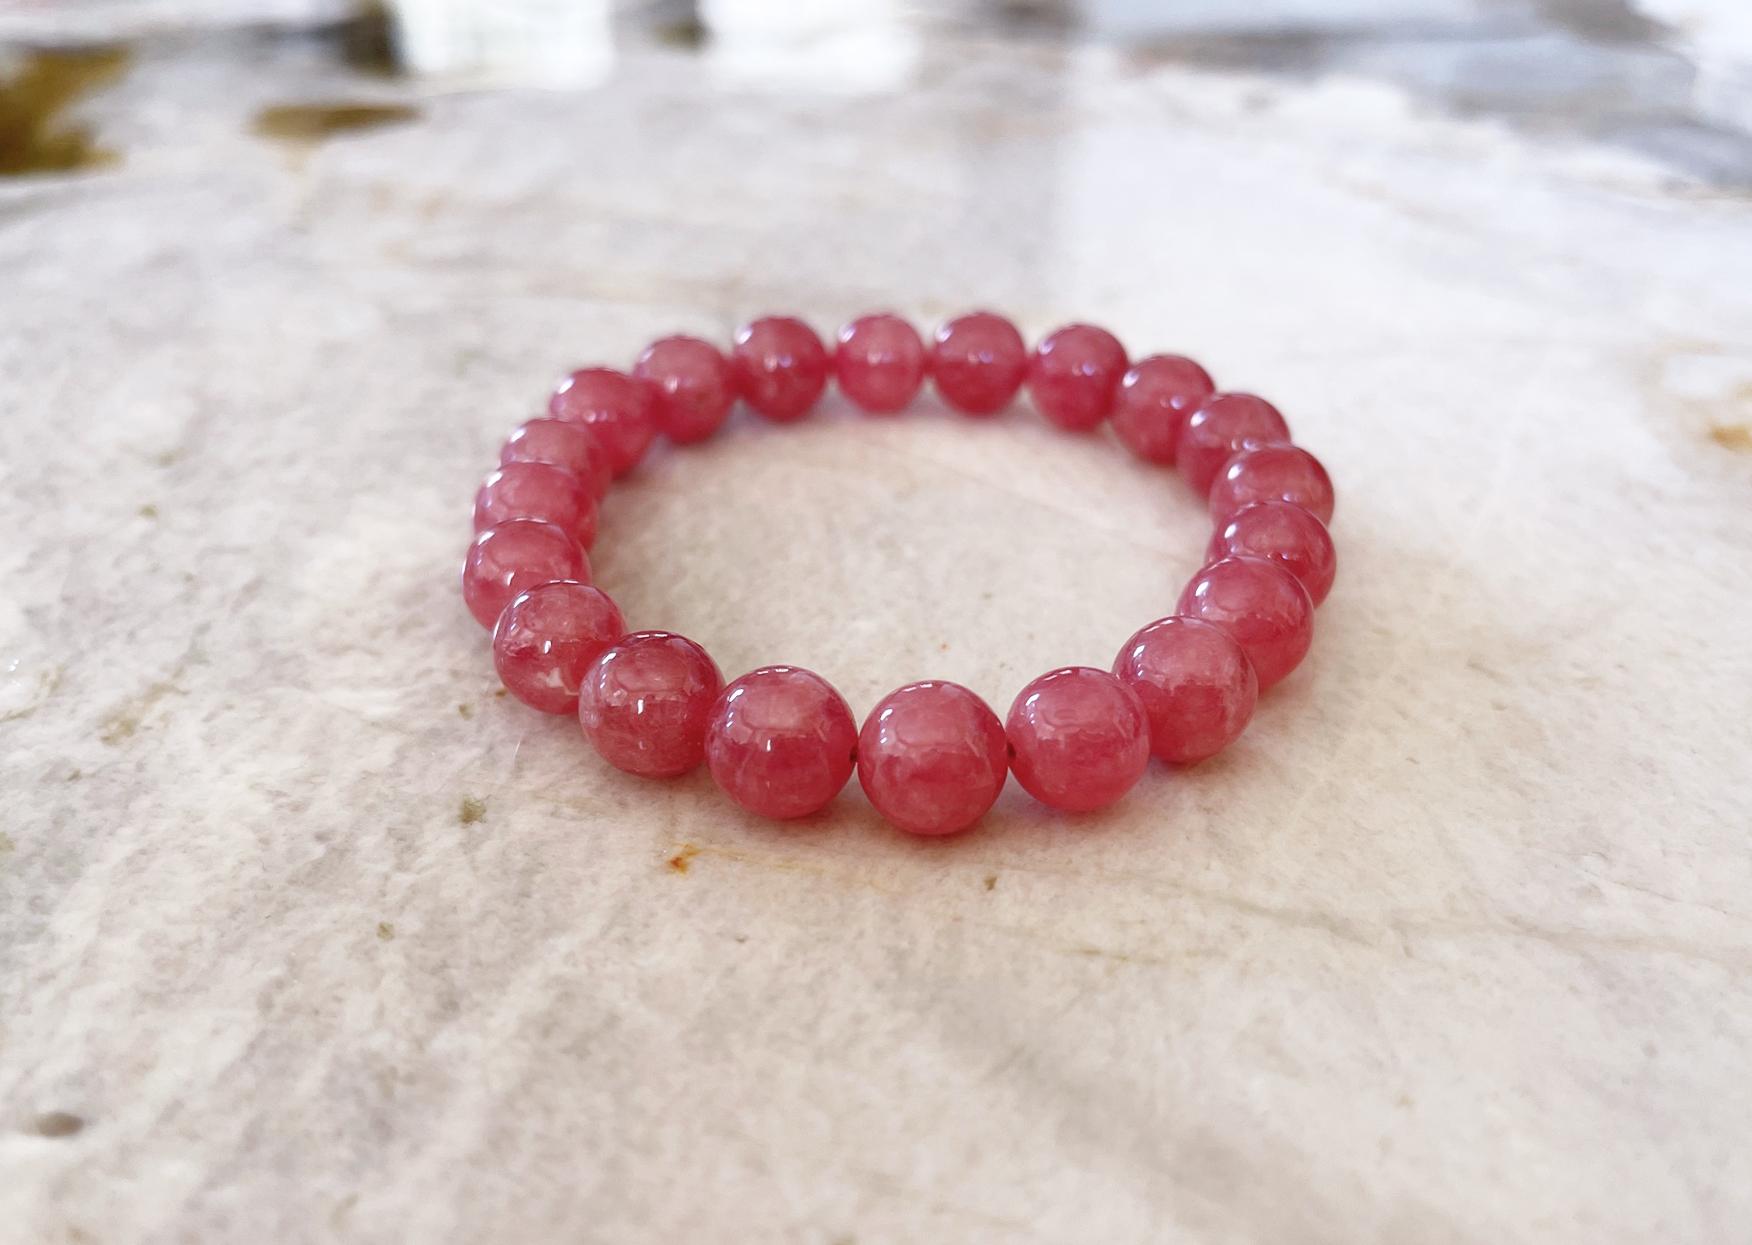 This is a truly spectacular natural rhodochrosite stretch stacking bracelet comprised of top quality 10mm round natural rhodochrosite beads. This bracelet was handcrafted in the USA by Rocat Designs and is approximately 7 inches (17.8 cm) long. The